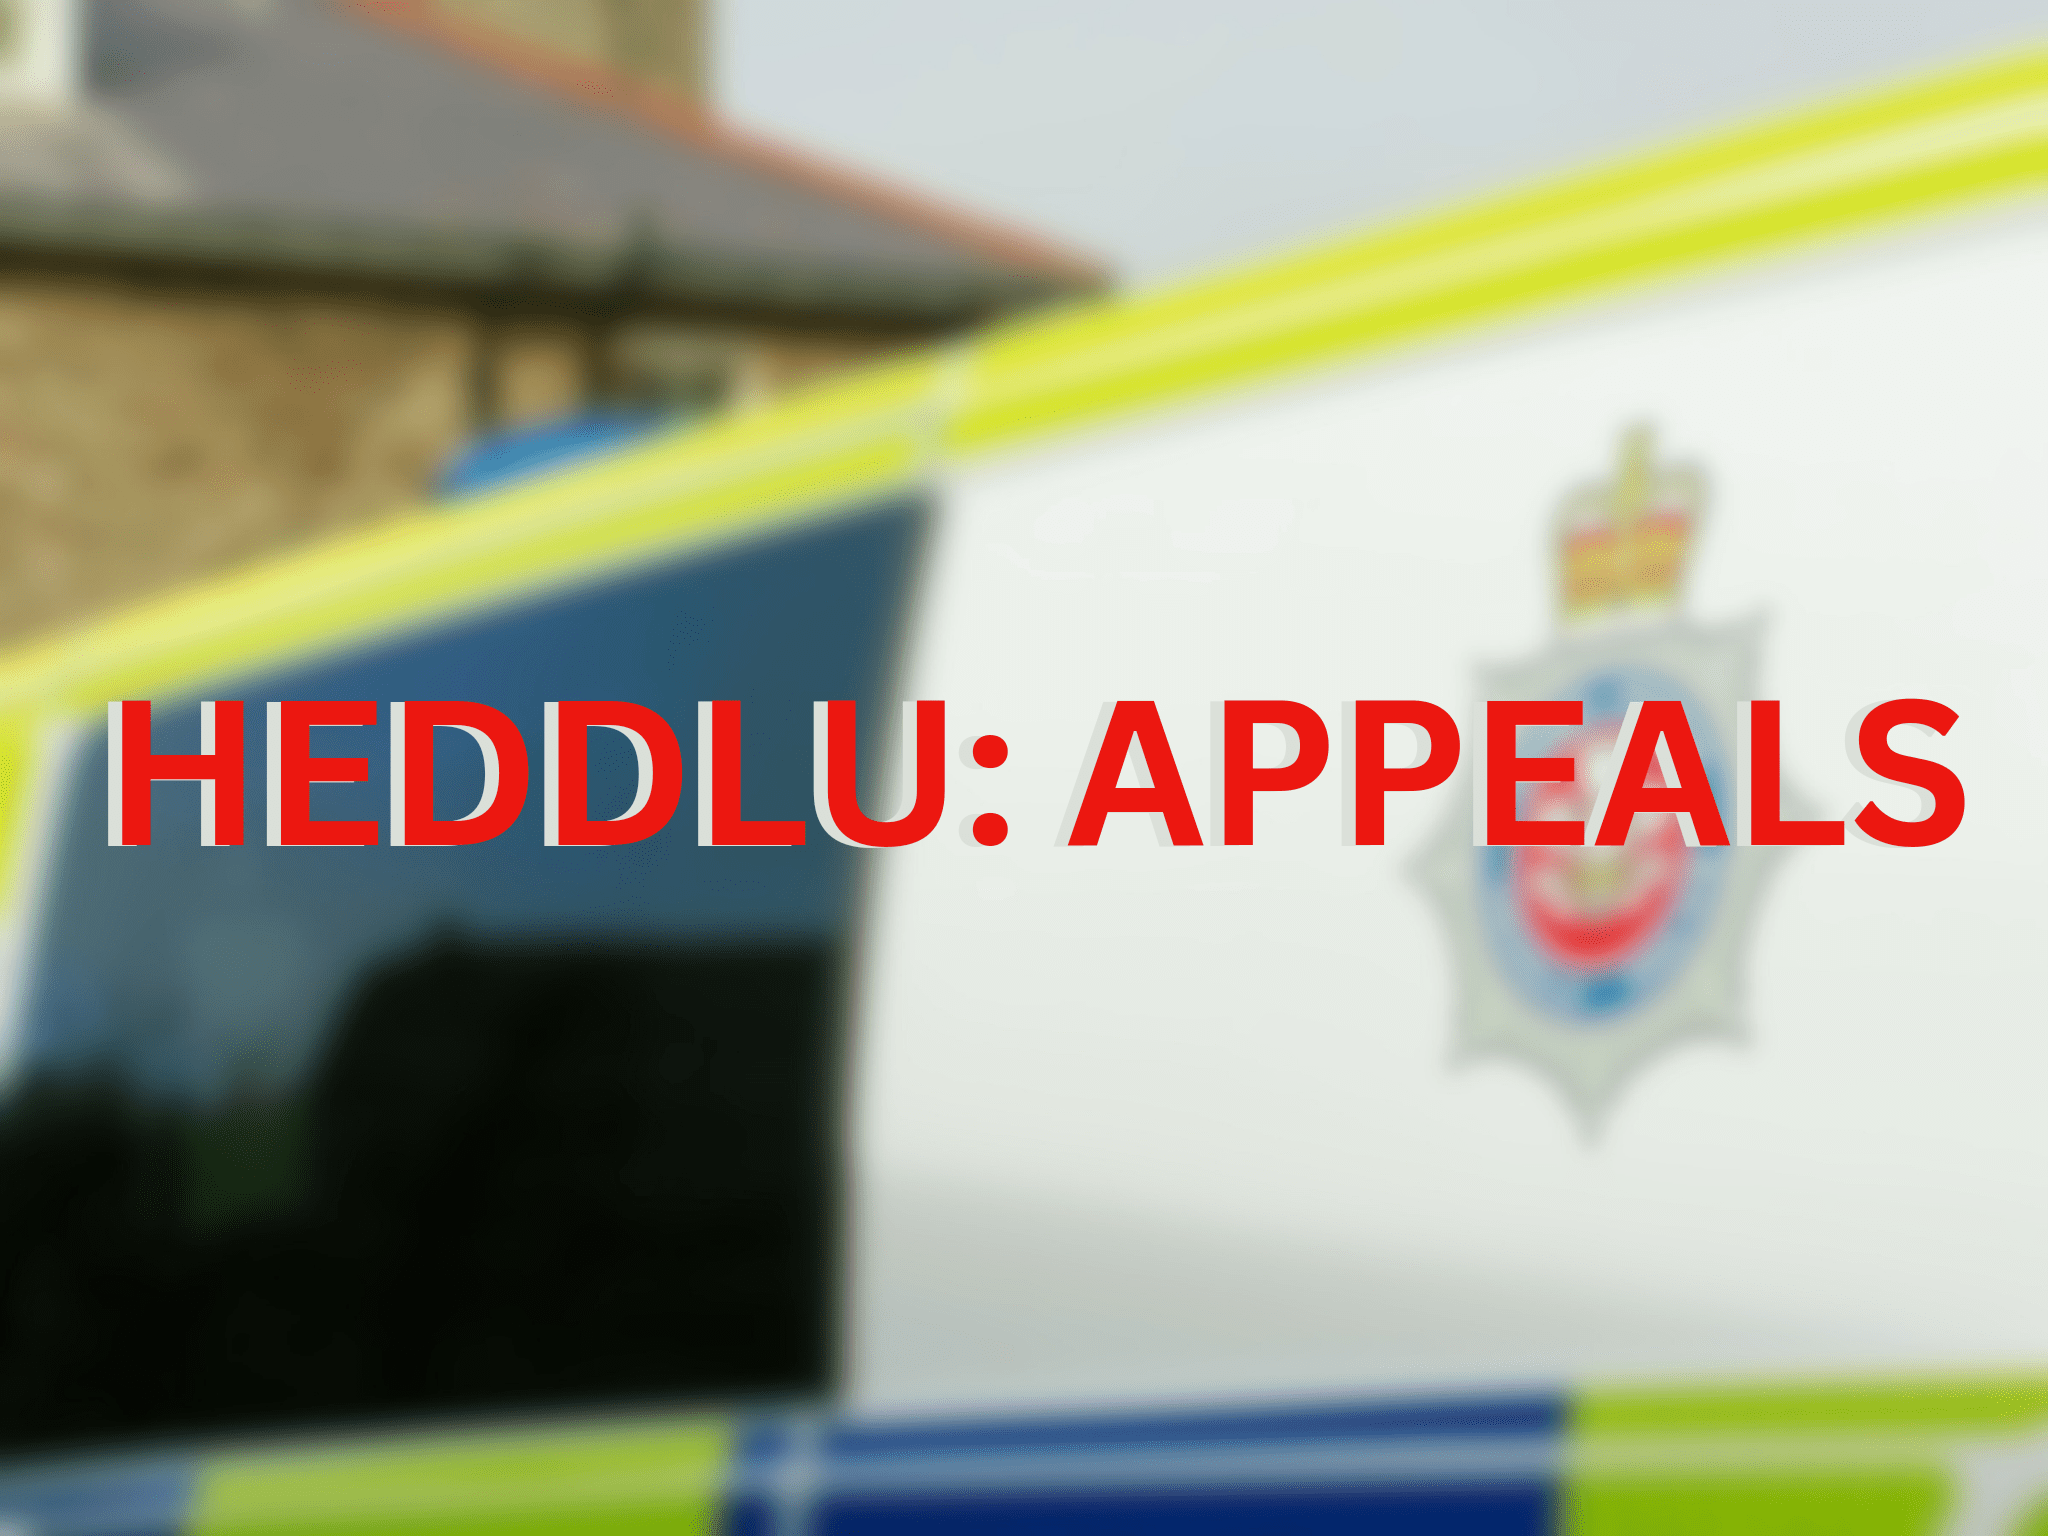 Police appeal for witnesses to serious collision near Hendy in which female cyclist died